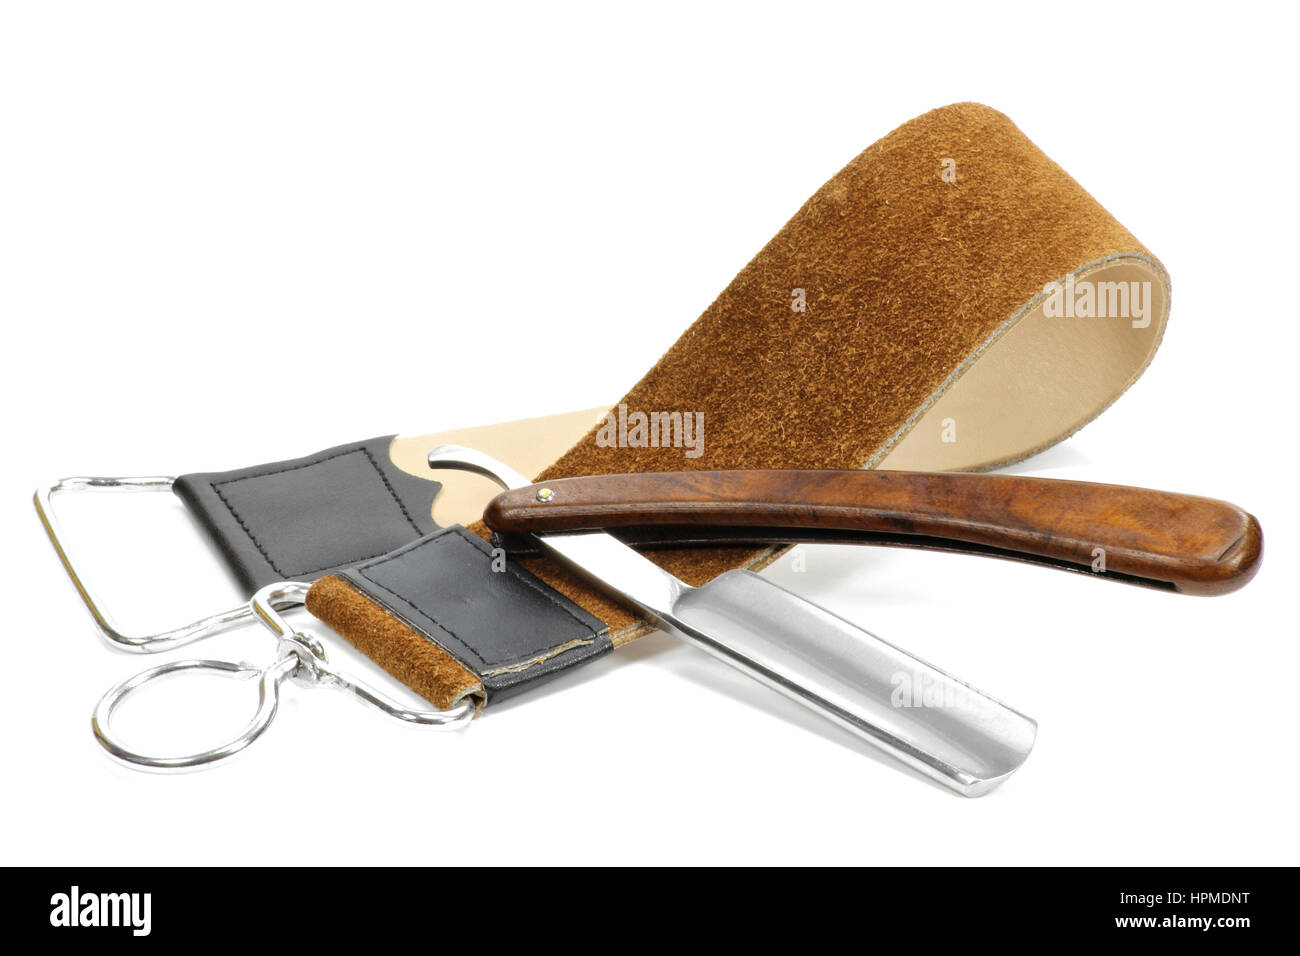 https://c8.alamy.com/comp/HPMDNT/straight-razor-with-leather-strop-isolated-on-white-background-HPMDNT.jpg